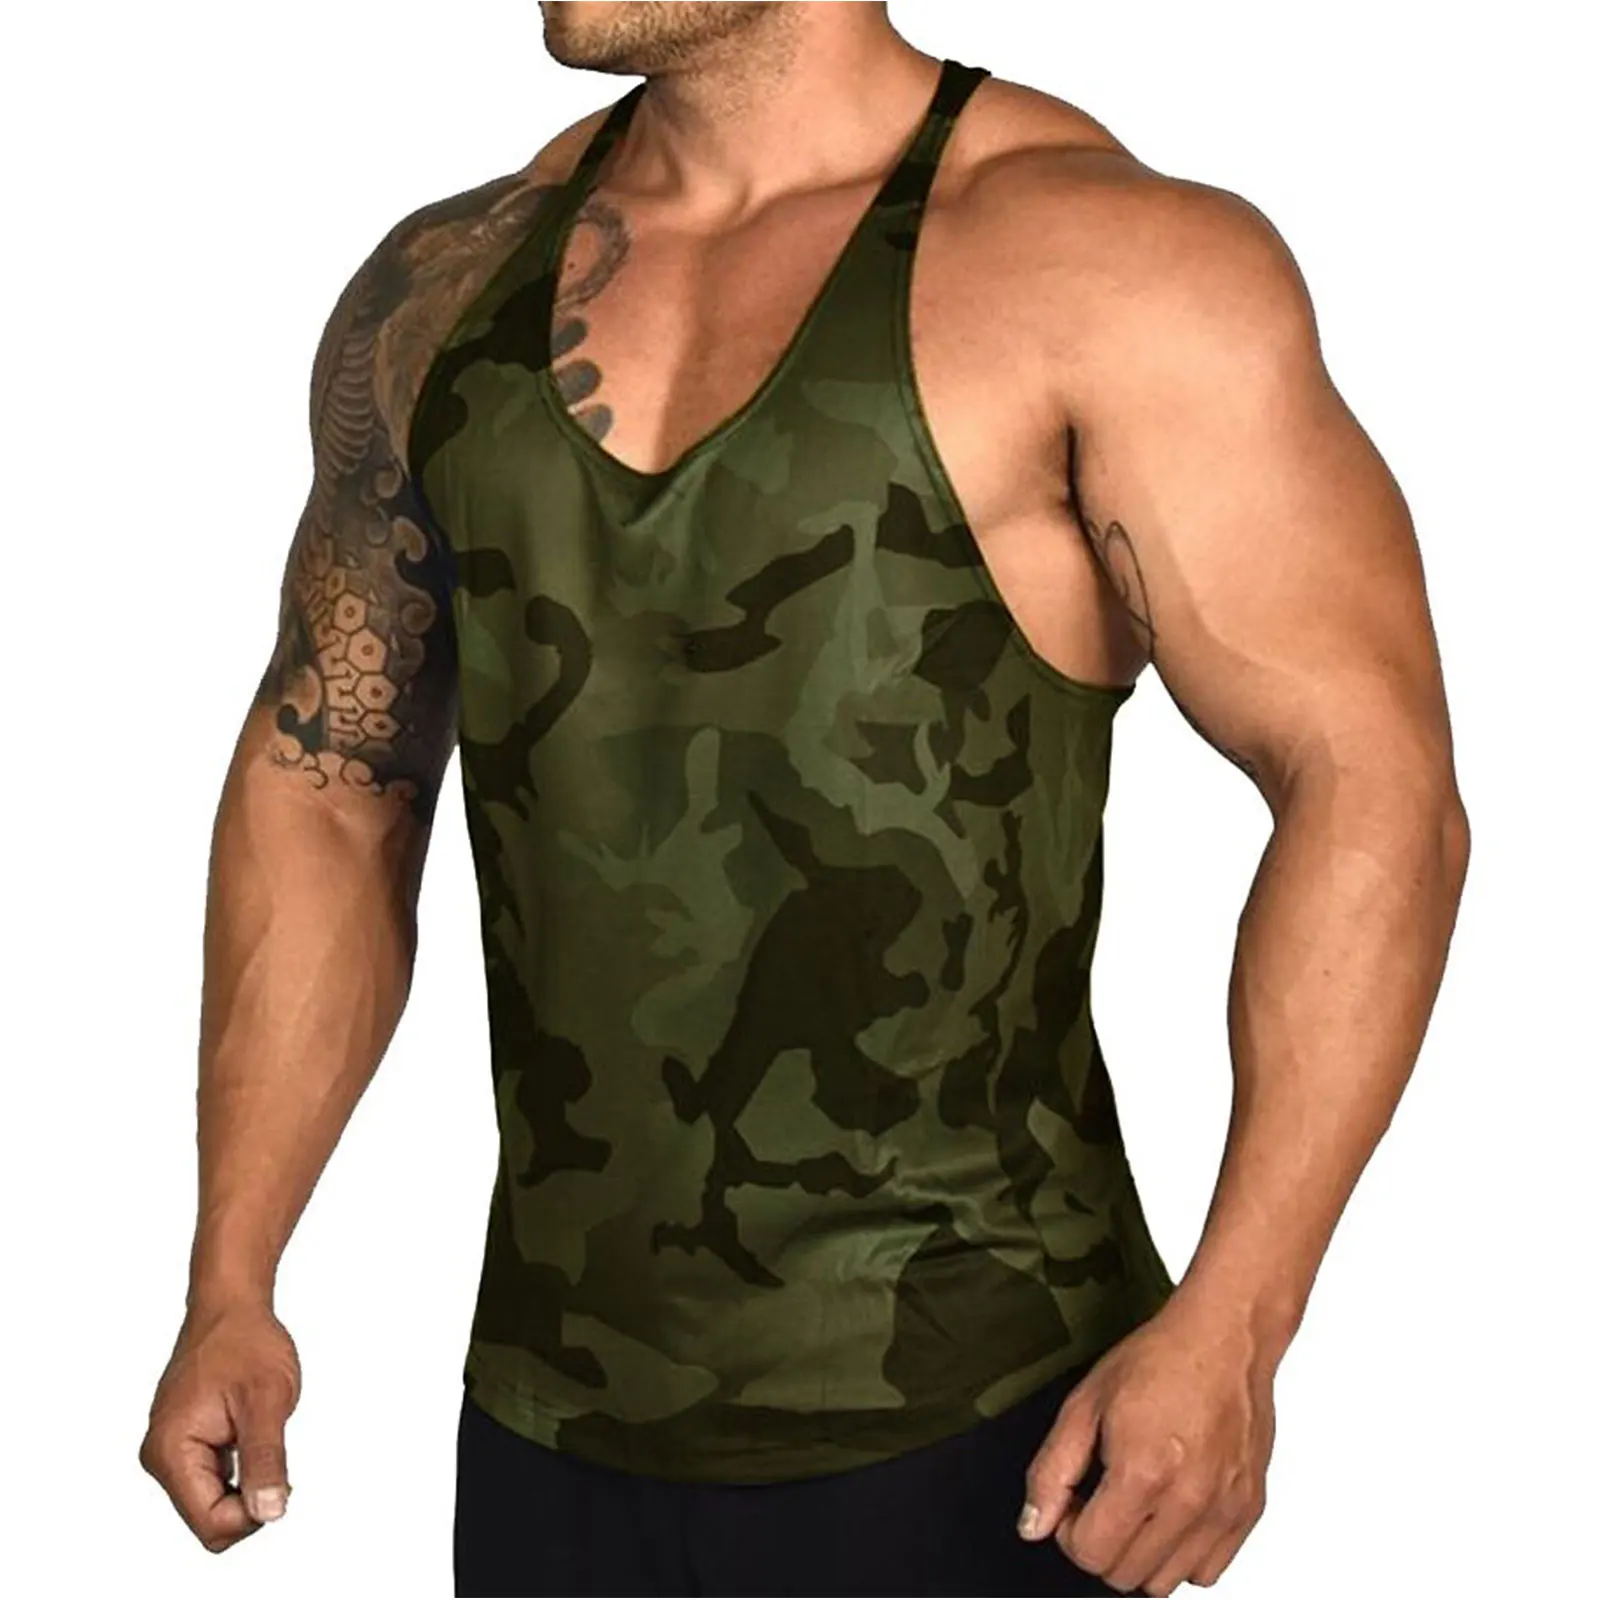 Men's Camo Camouflage Sleeveless Muscle Gym Sports Fitness A-Shirt Tank Top Vest 